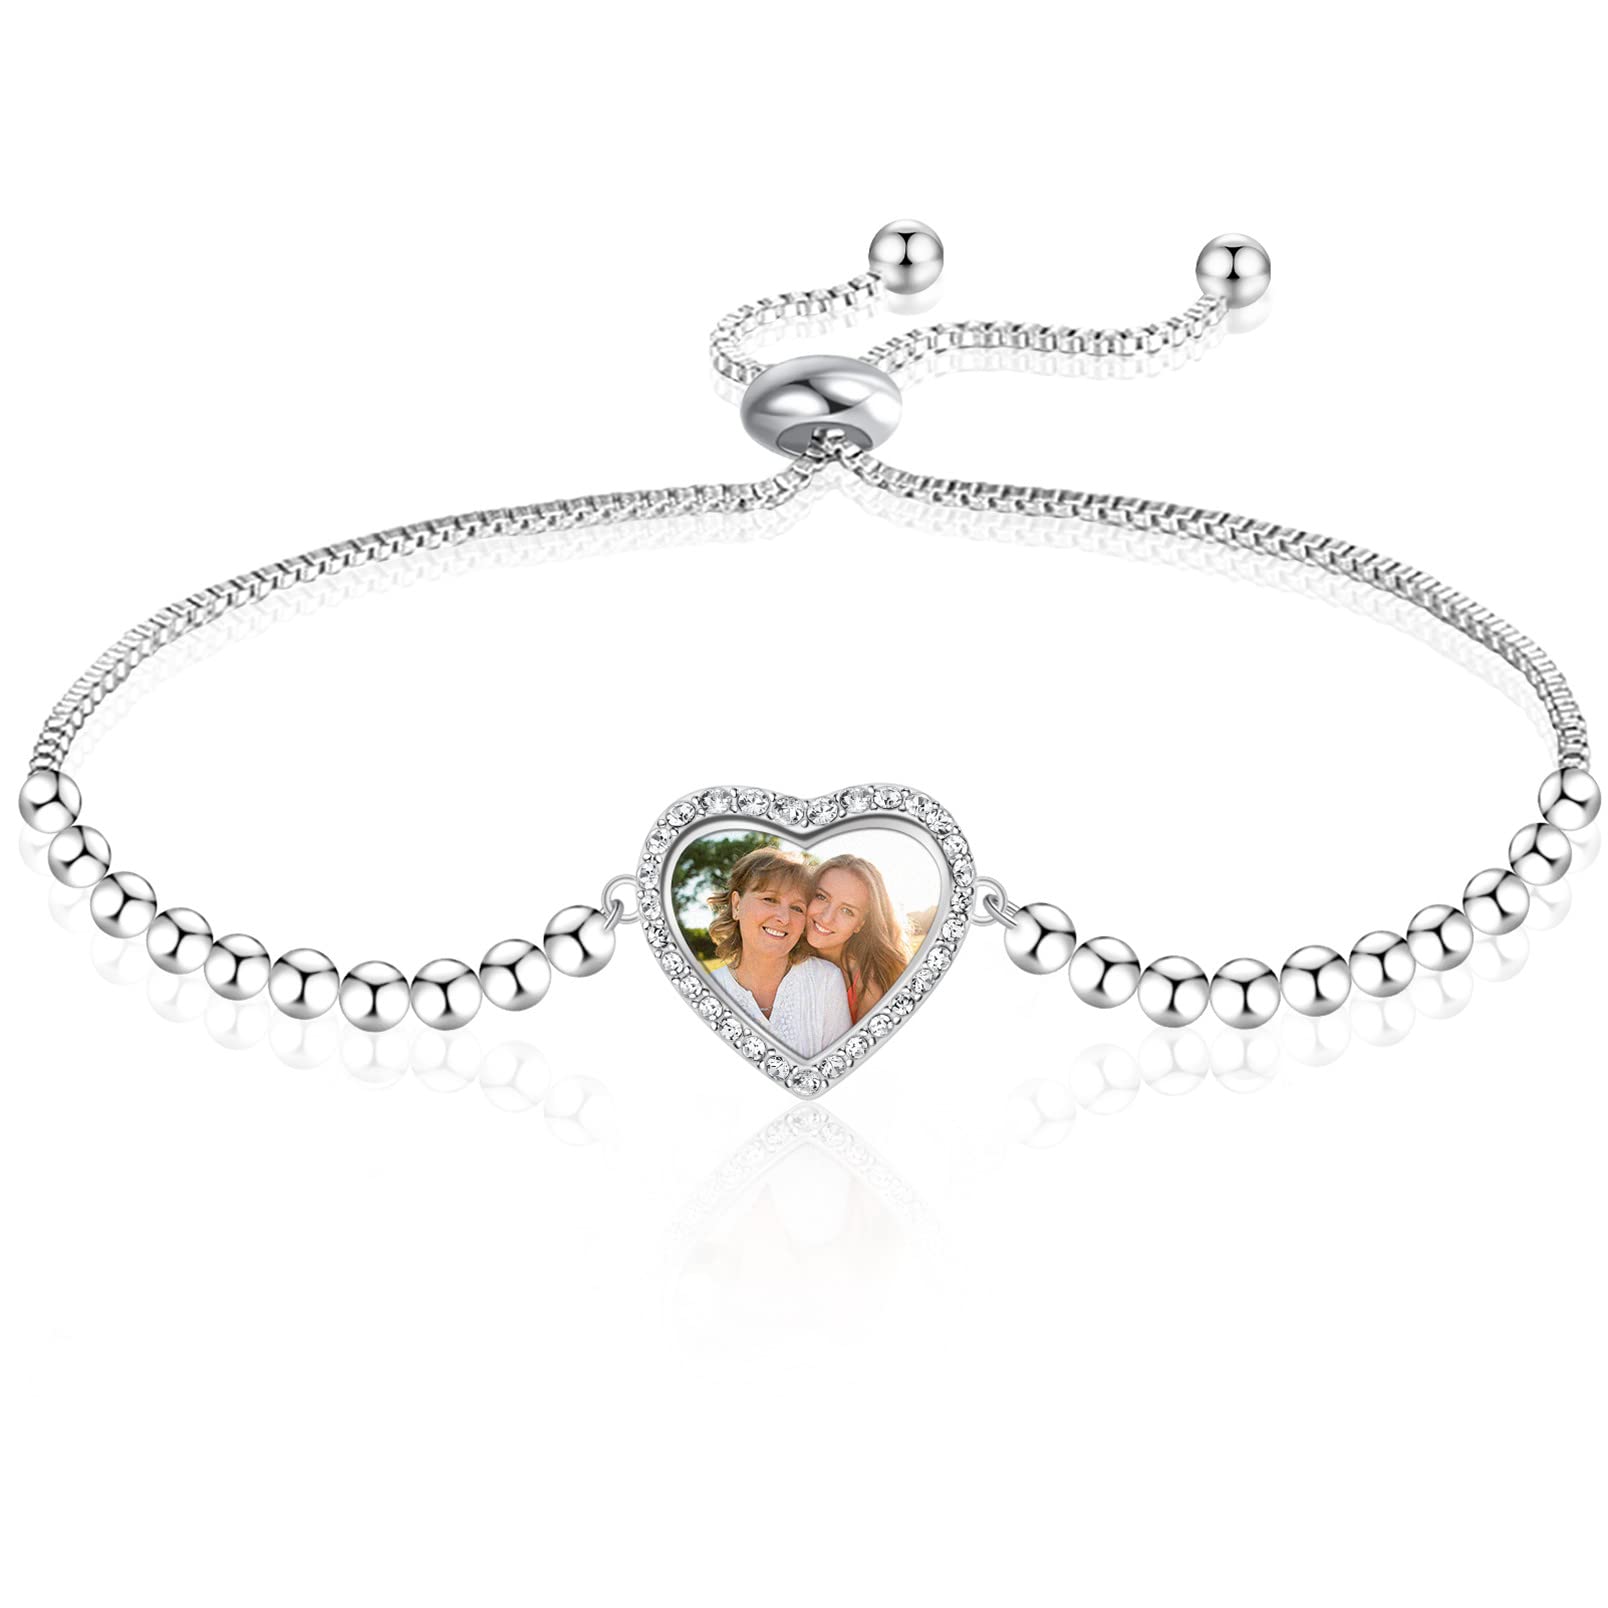 Personalized Bracelet for Women with the Heart Photo